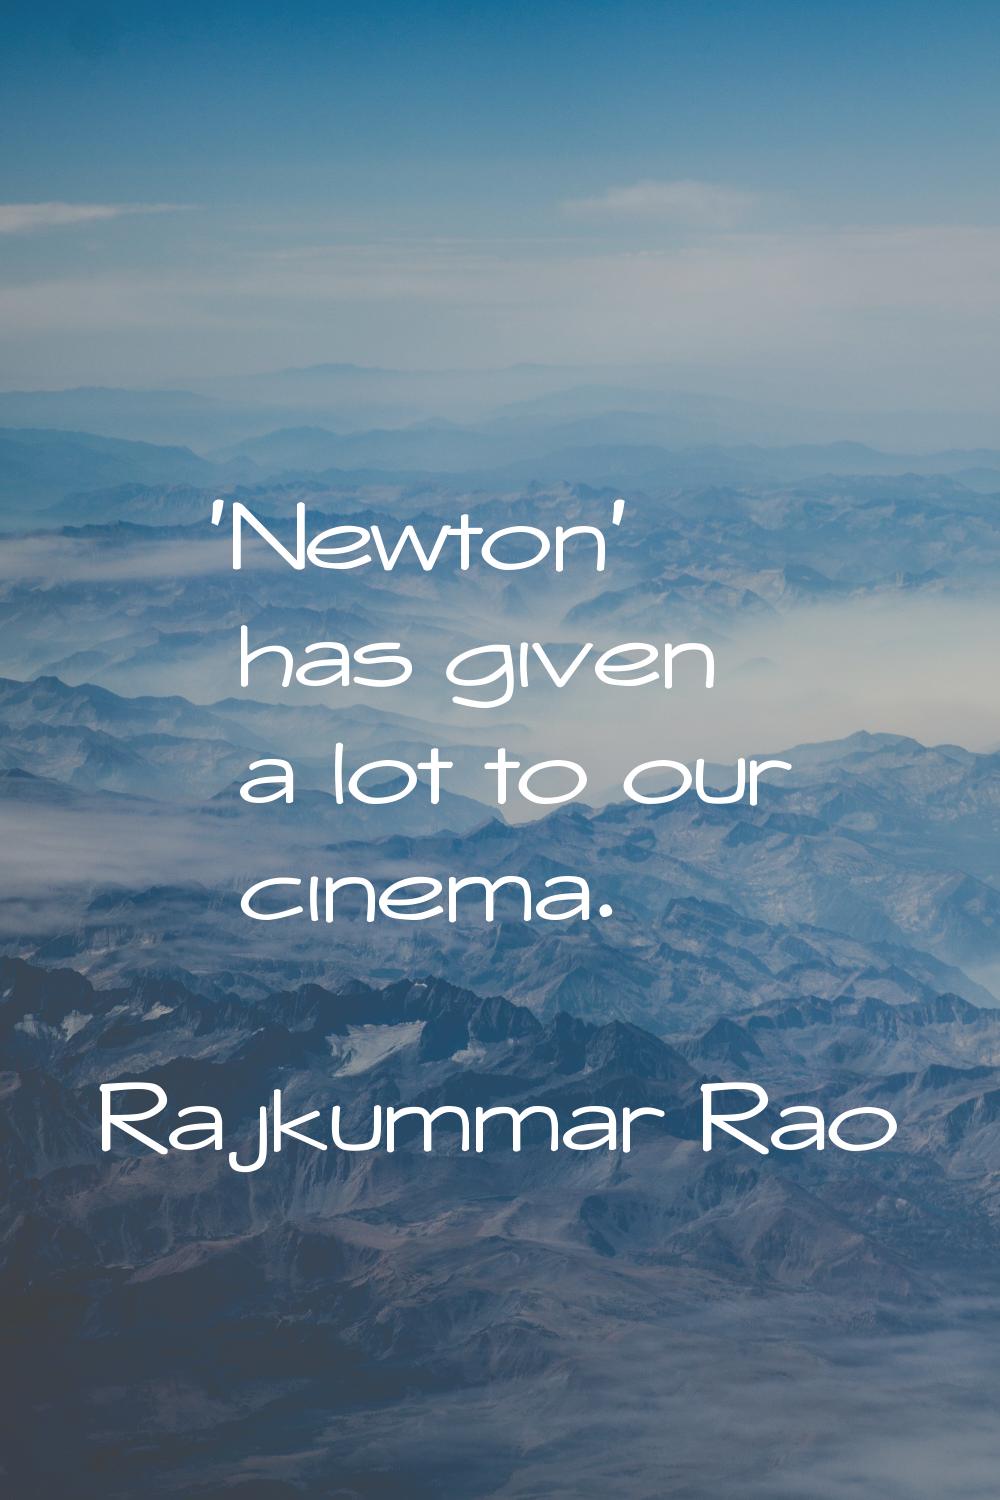 'Newton' has given a lot to our cinema.